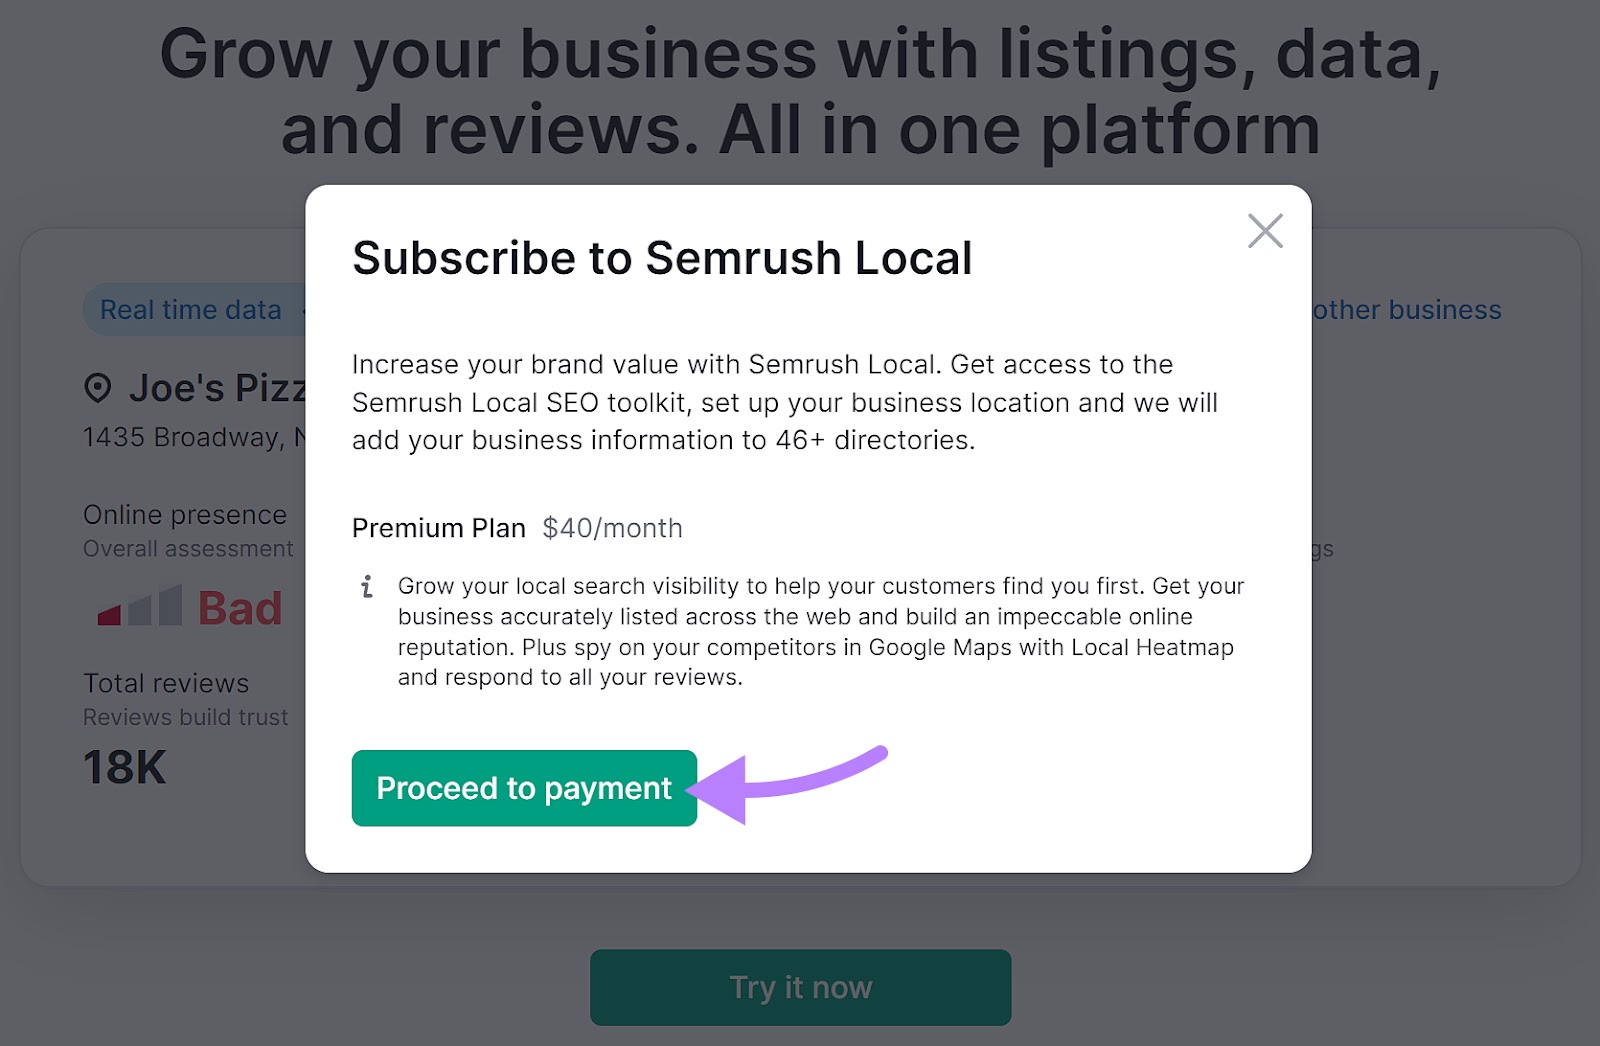 Pop-up showing the Semrush Local description and pricing plan. "Proceed to payment" button is highlighted.